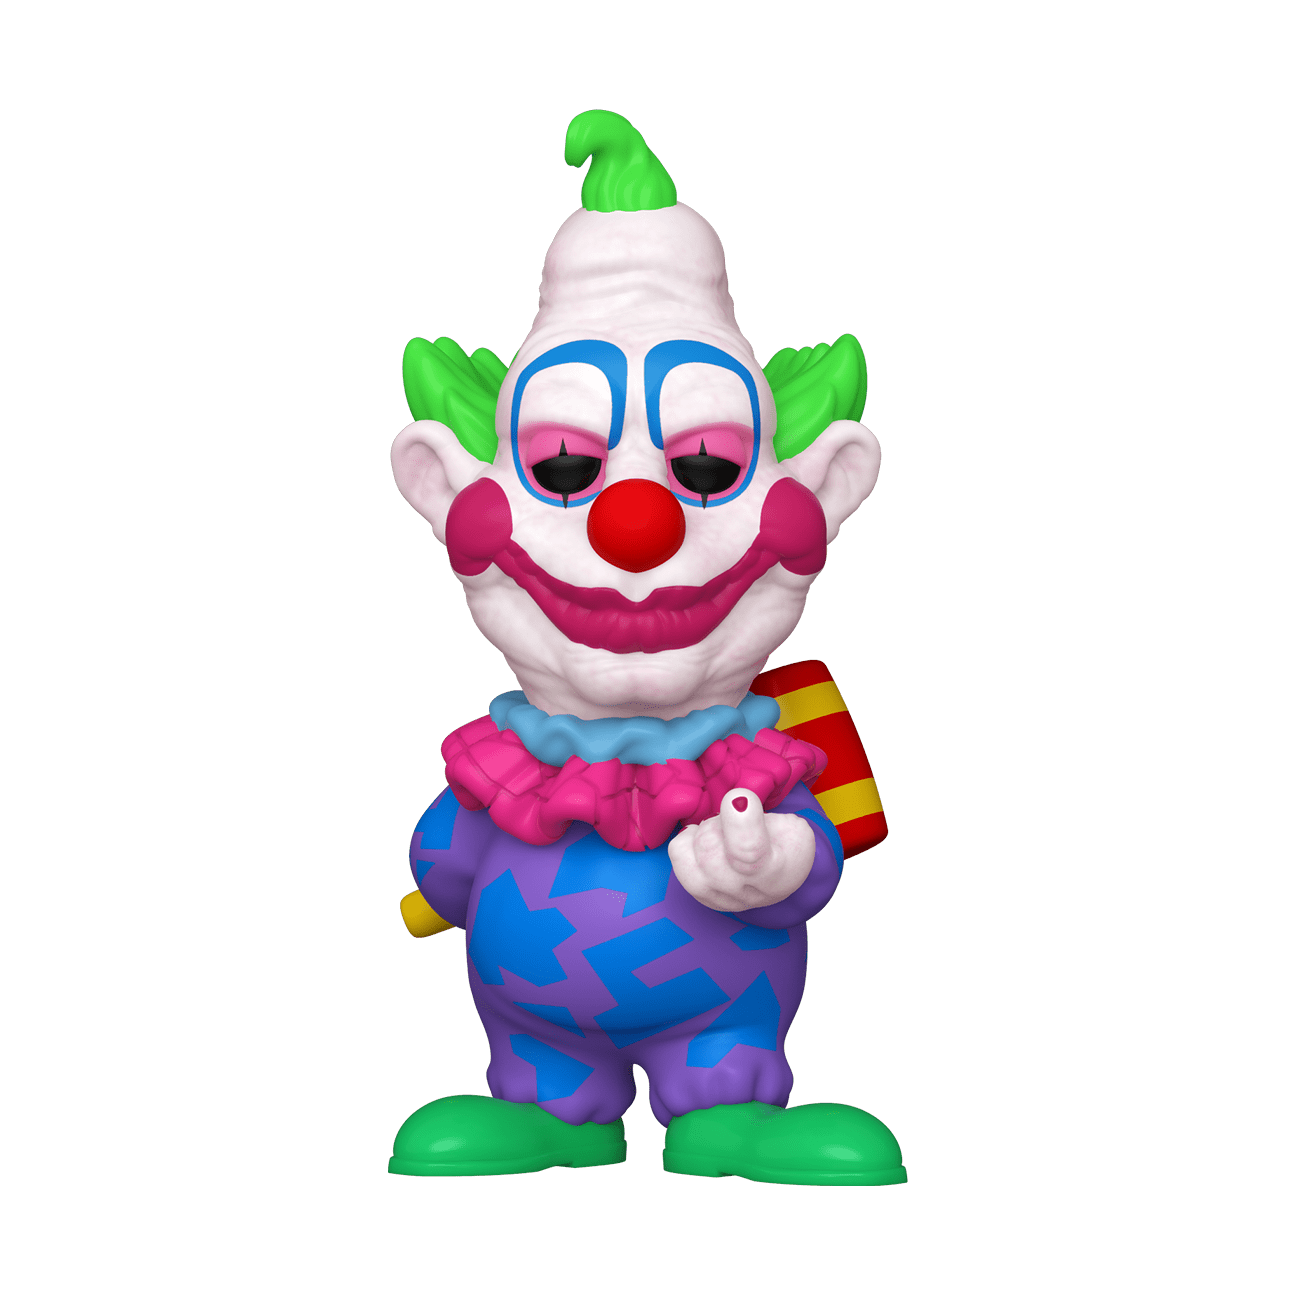 Funko Pop! Jumbo (Killer Klowns from Outer Space)